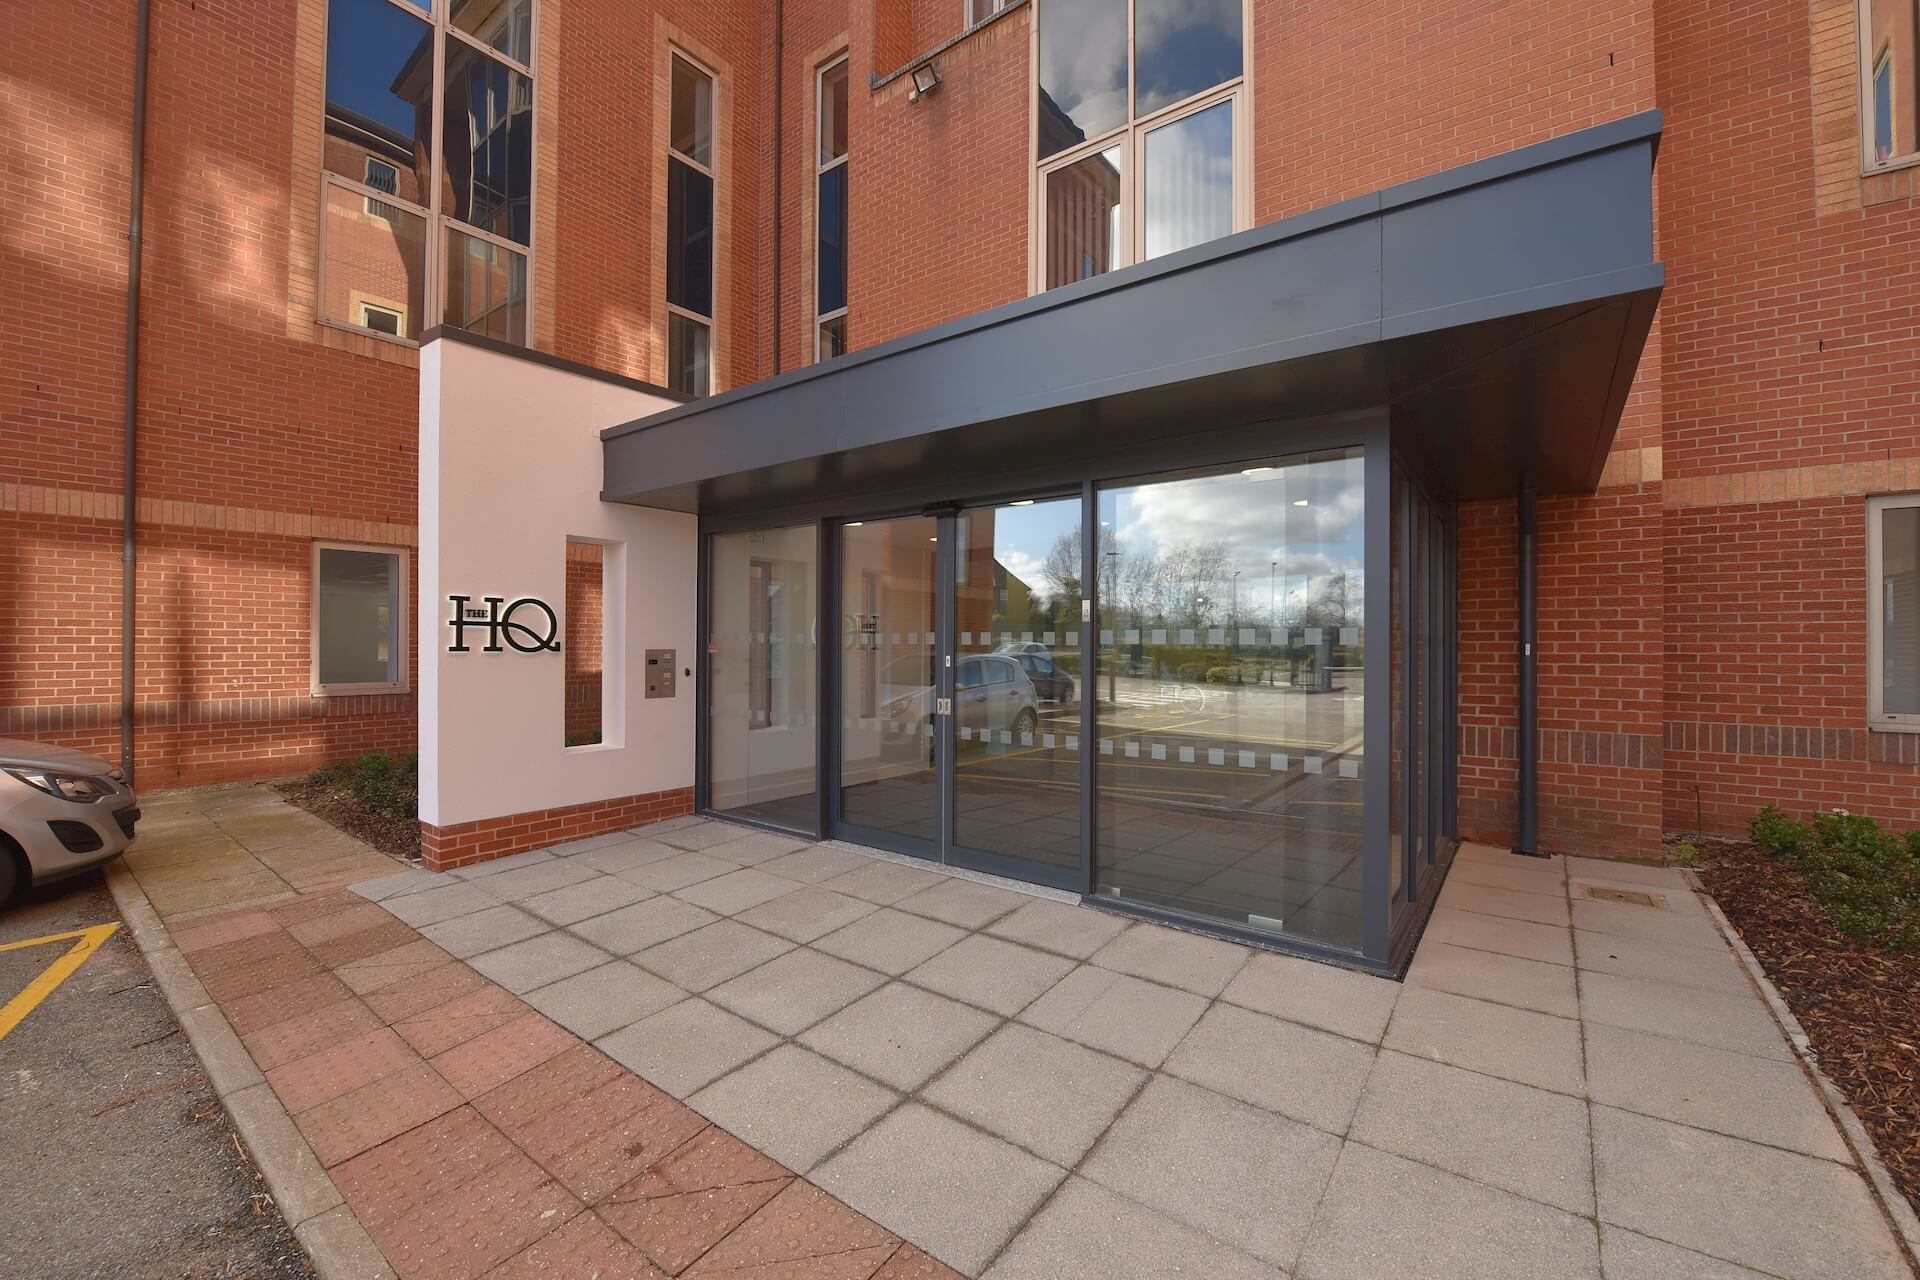 The new glass door entrance to The HQ Chesterfield